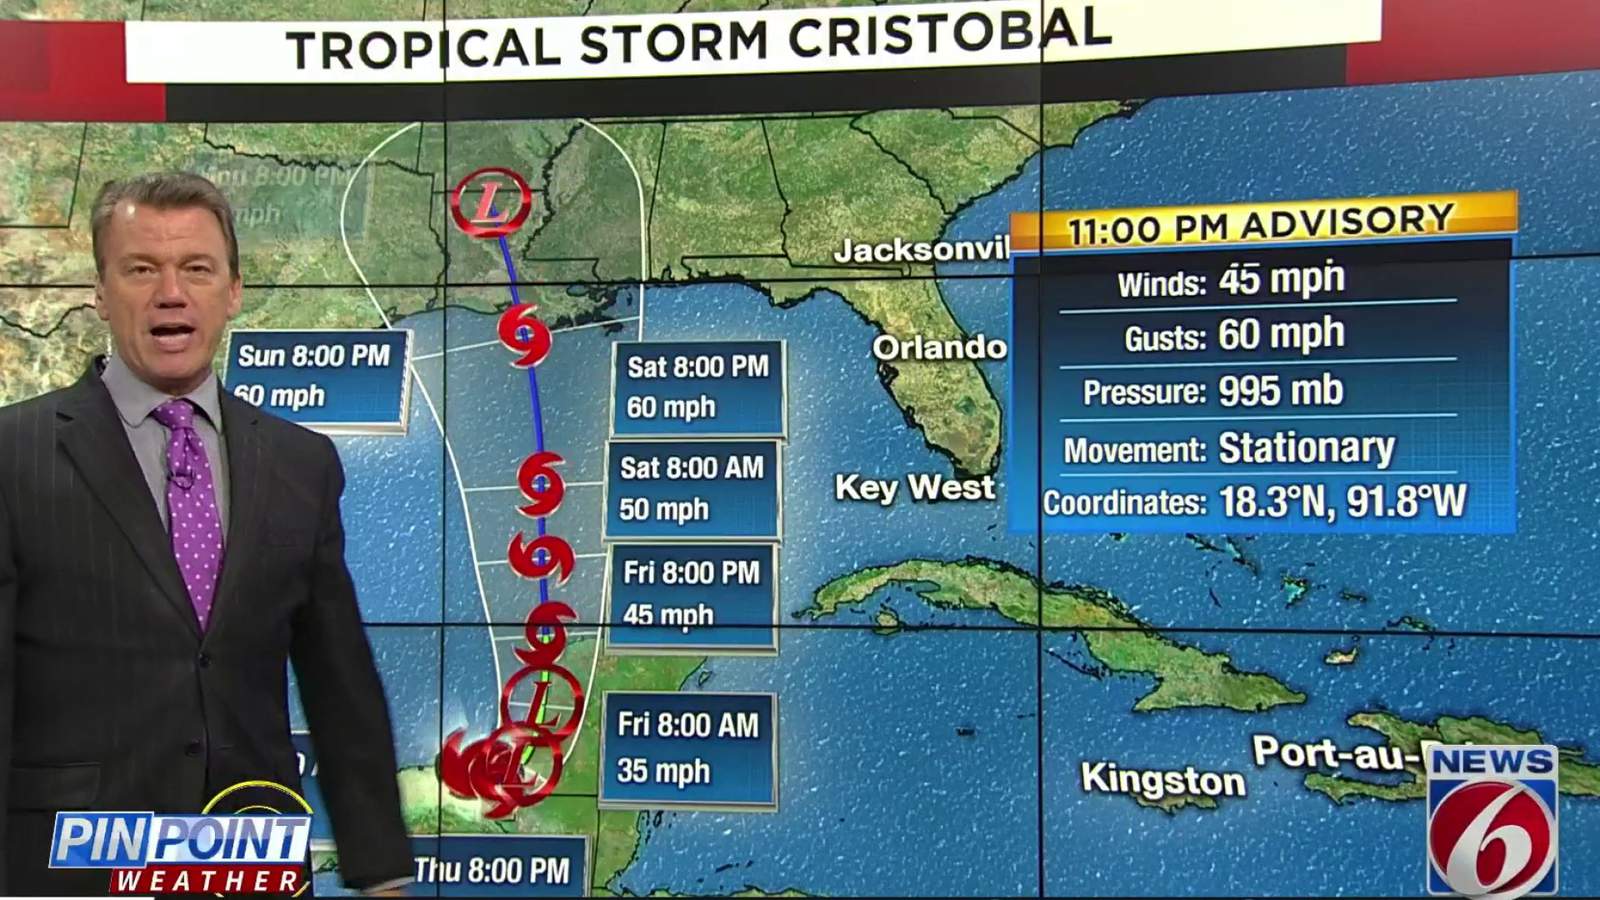 Here’s how Tropical Storm Cristobal will affect Central Florida